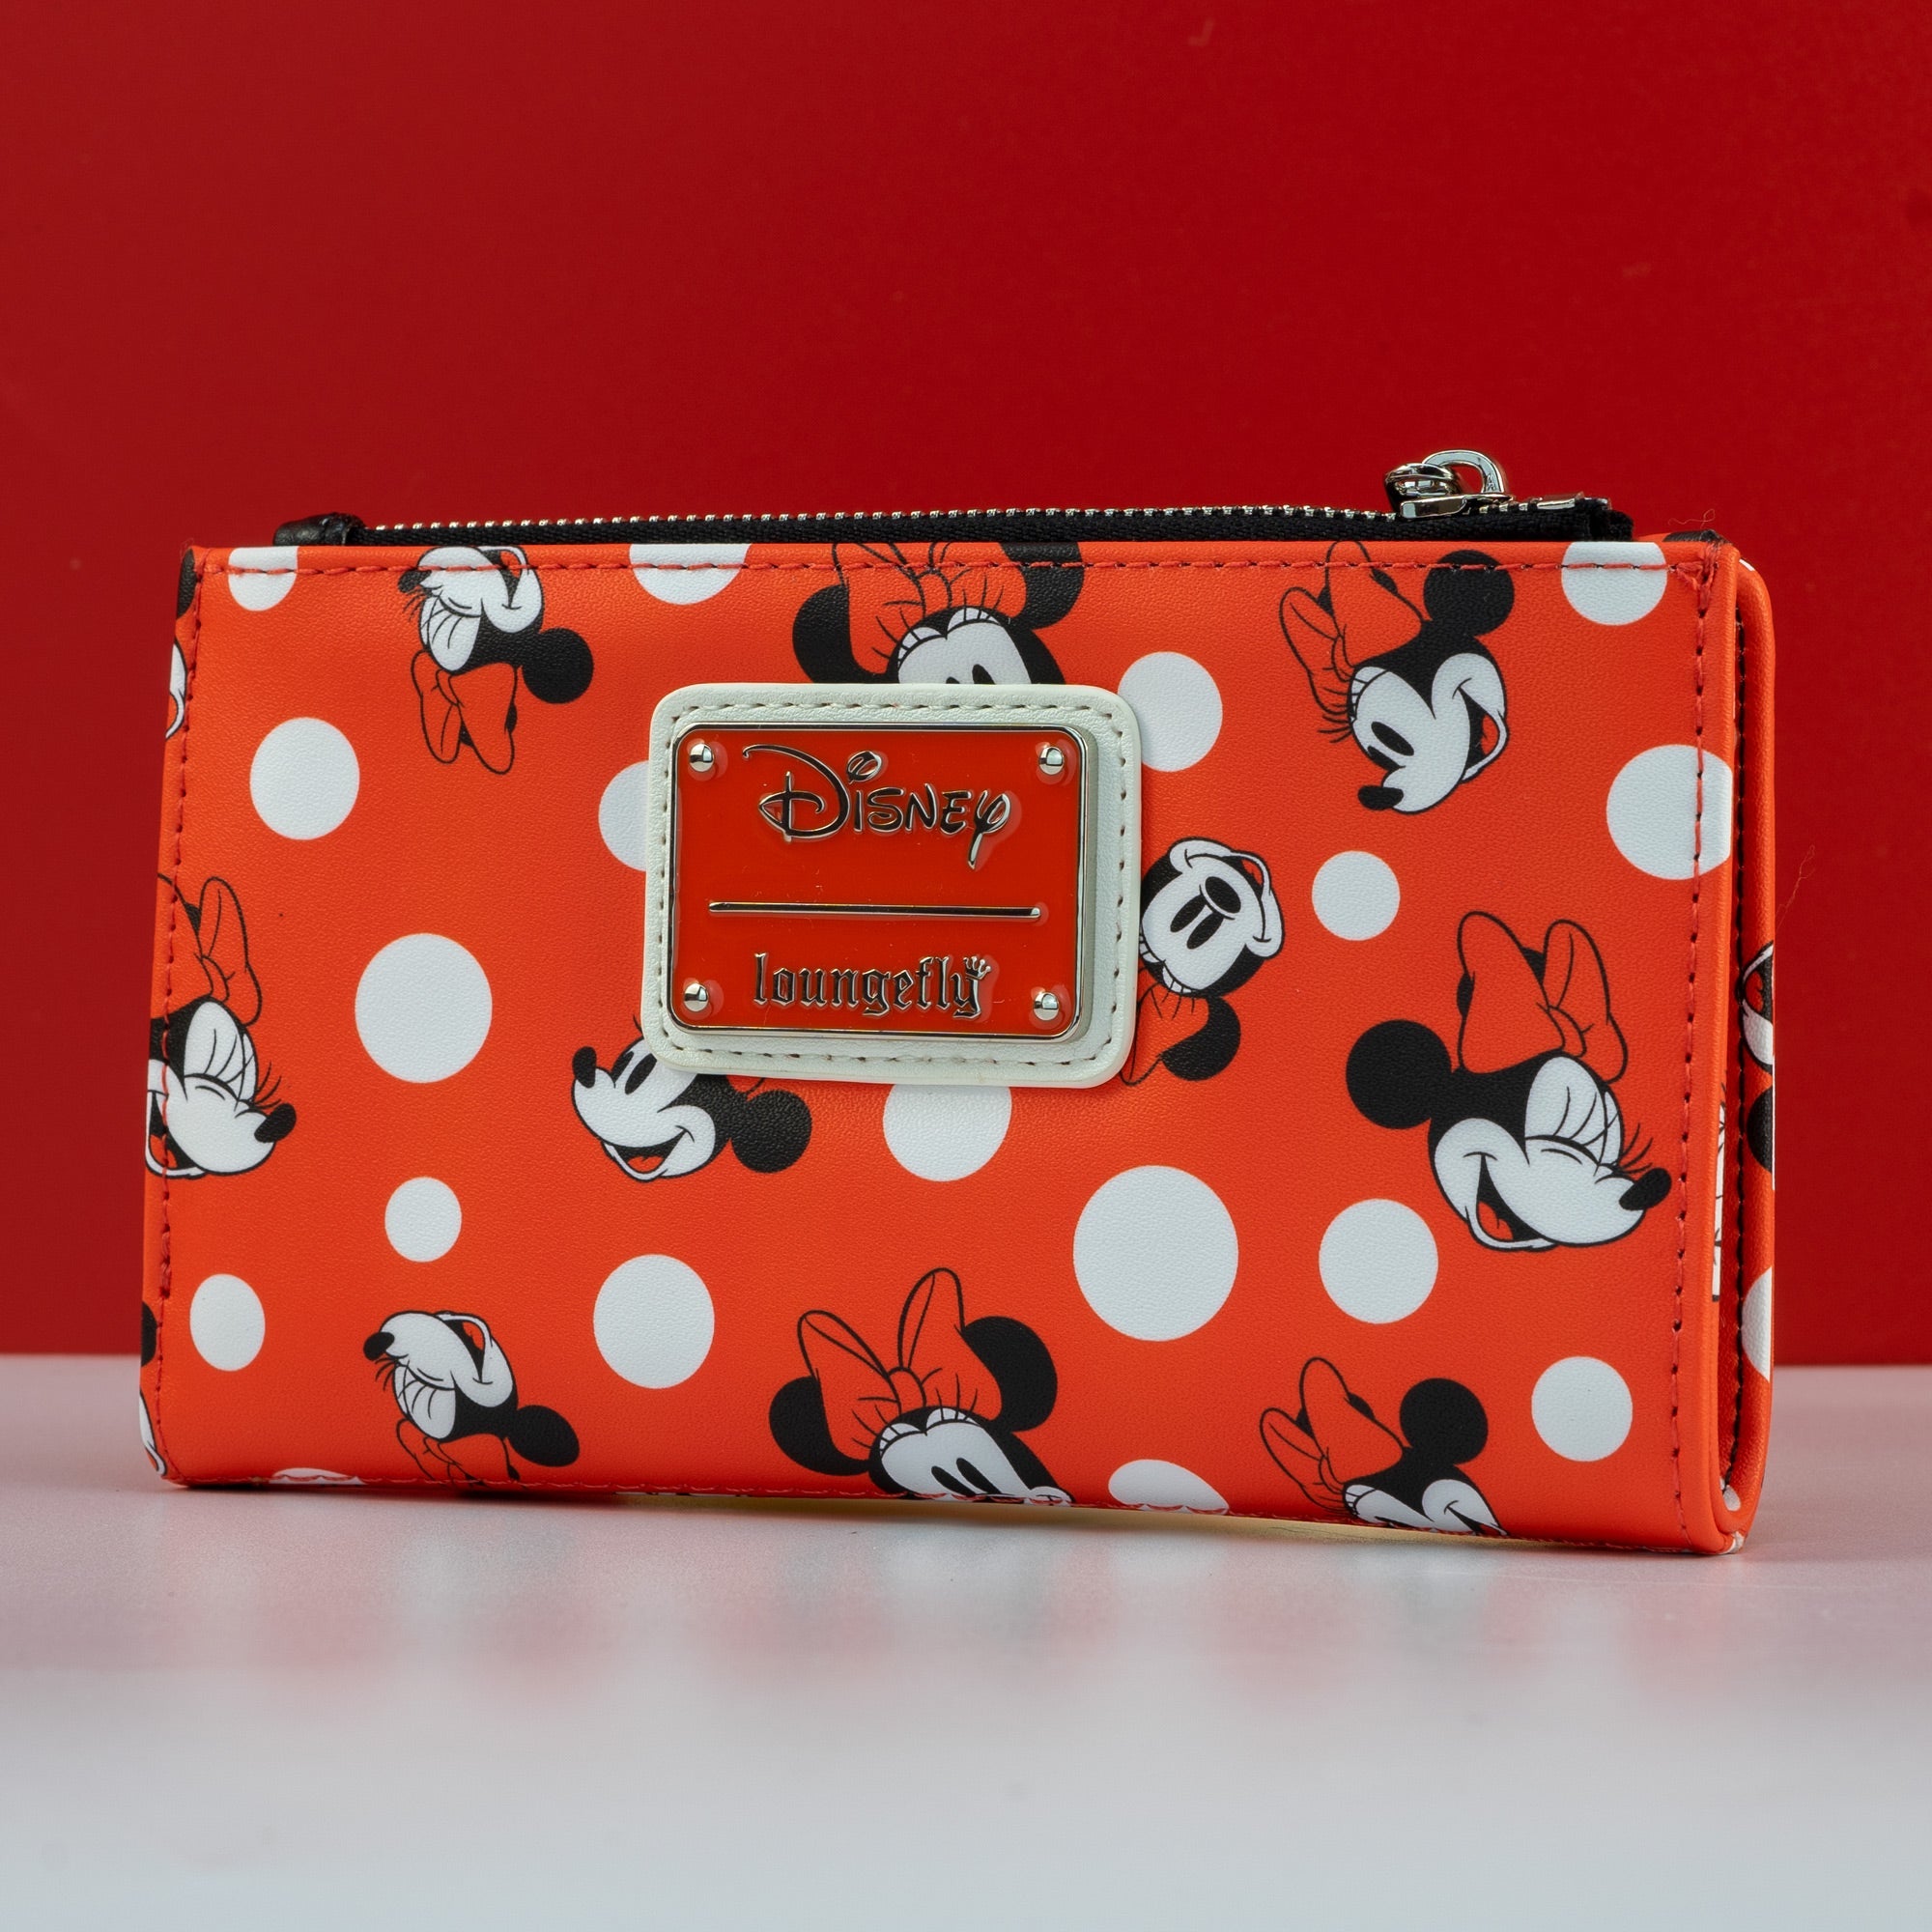 Loungefly x Disney Minnie Mouse Red Polka Dot AOP Purse - GeekCore